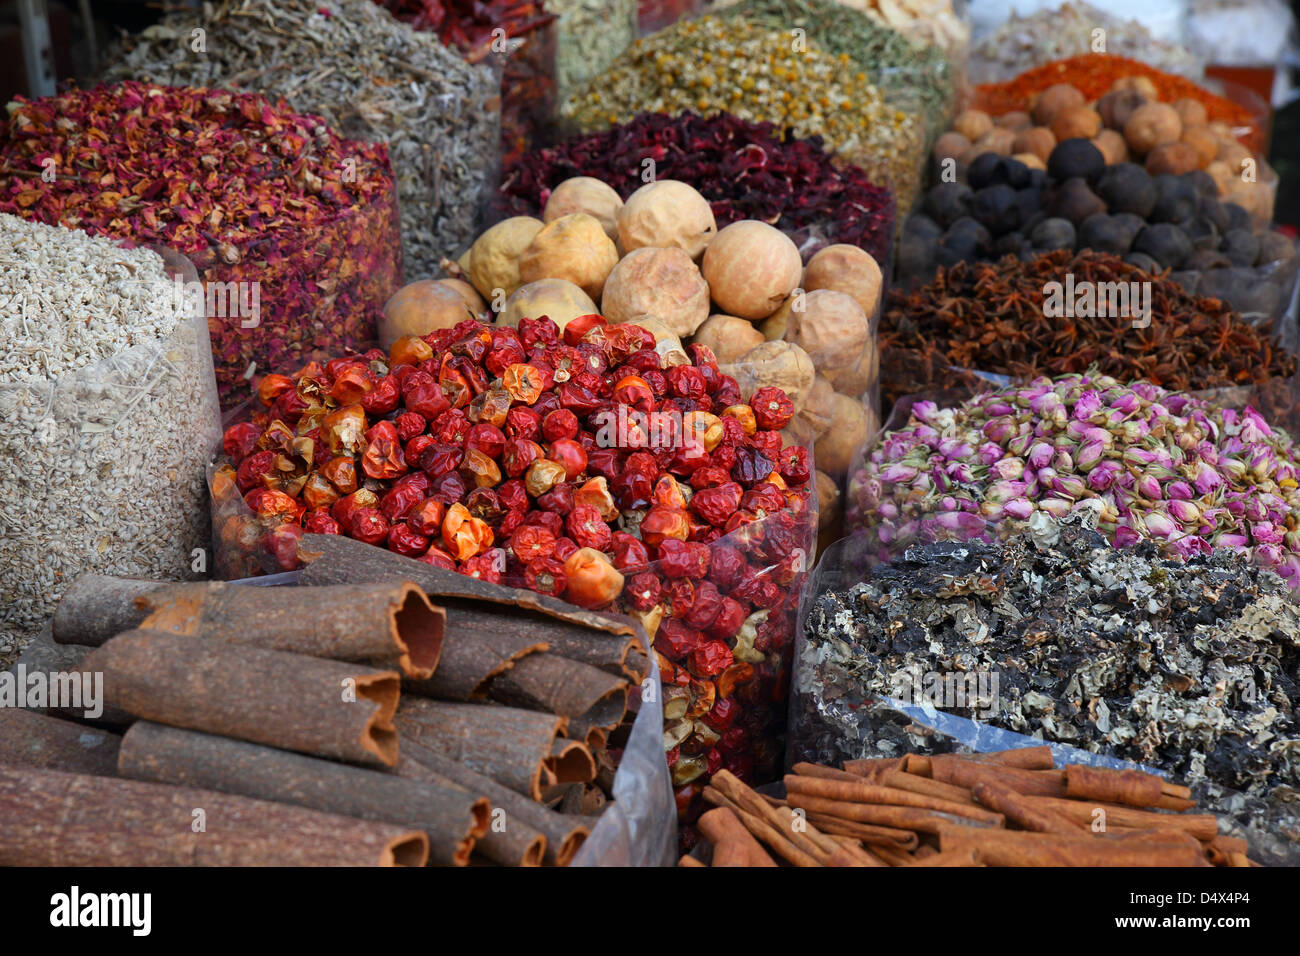 Bags of colorful spices at souk market in Dubai, United Arab Emirates Stock Photo